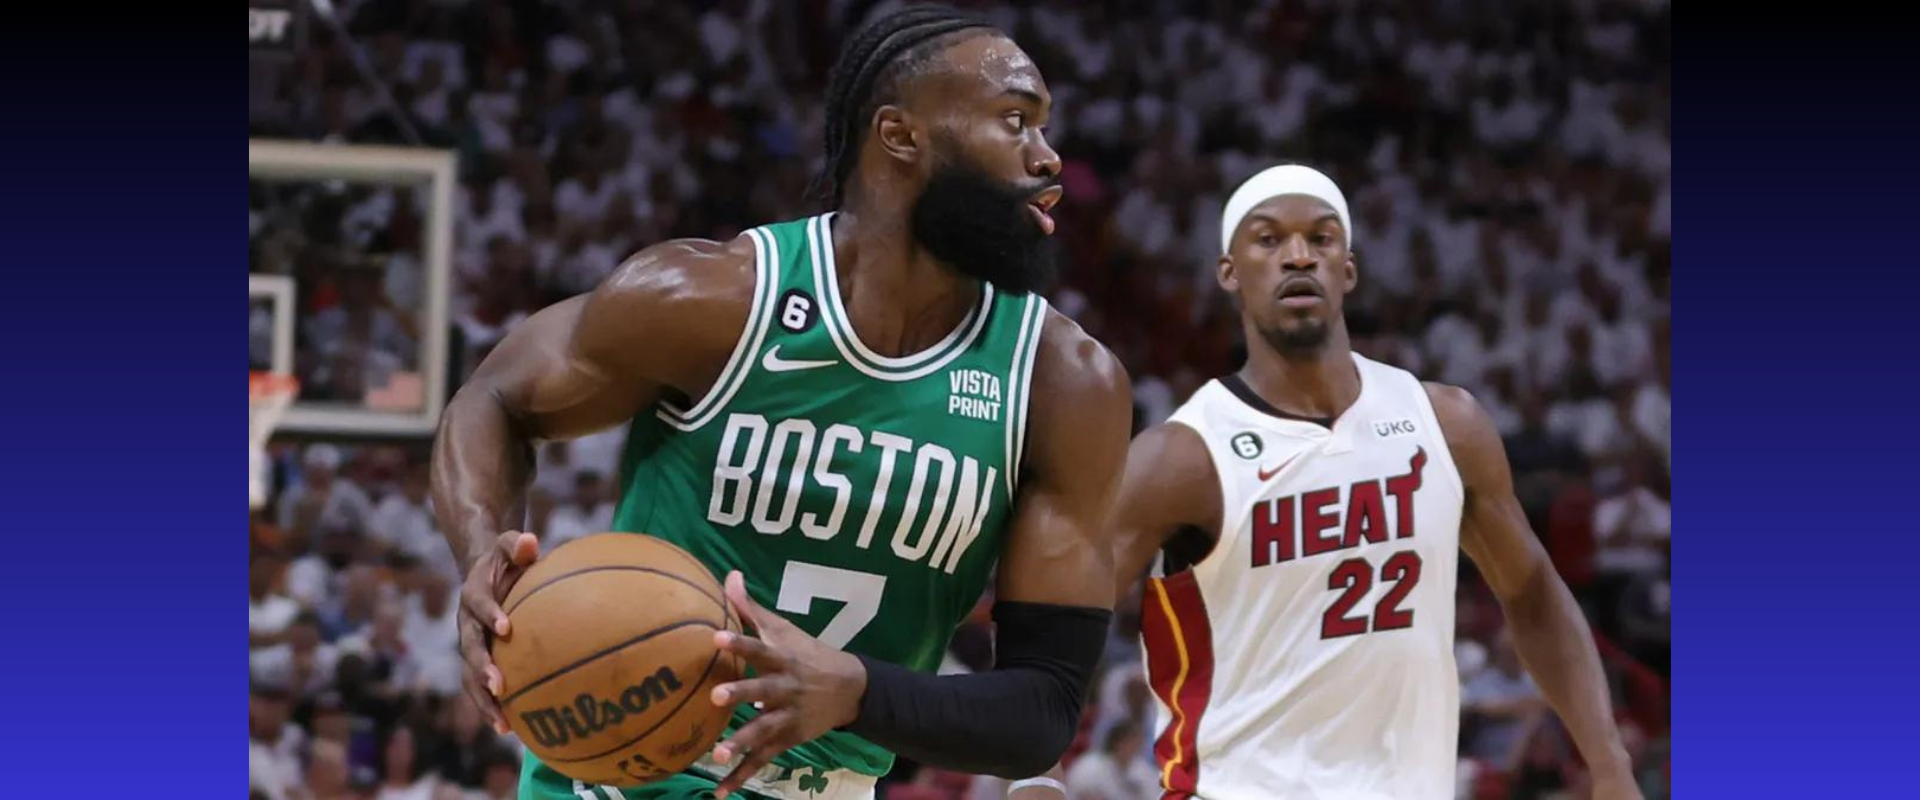 Celtics Soar Over Heat in Resounding Eastern Conference Victory